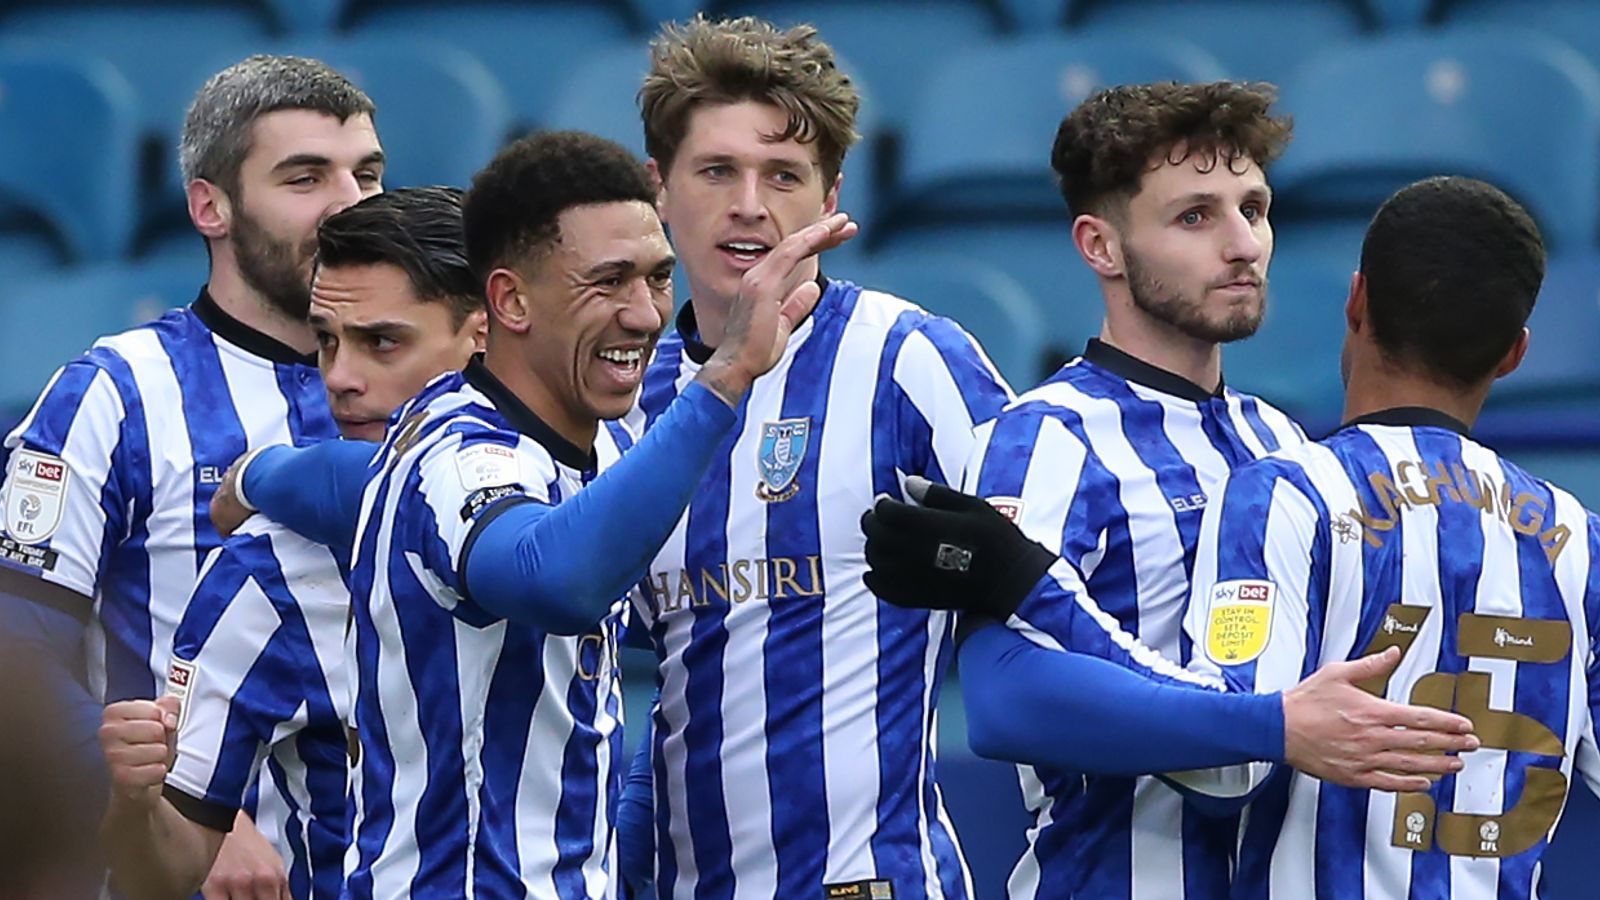 According to BBC report: Sheffield Wednesday face Sunderland on Friday night and a big crowd is expected to make the trip down from the North East…..